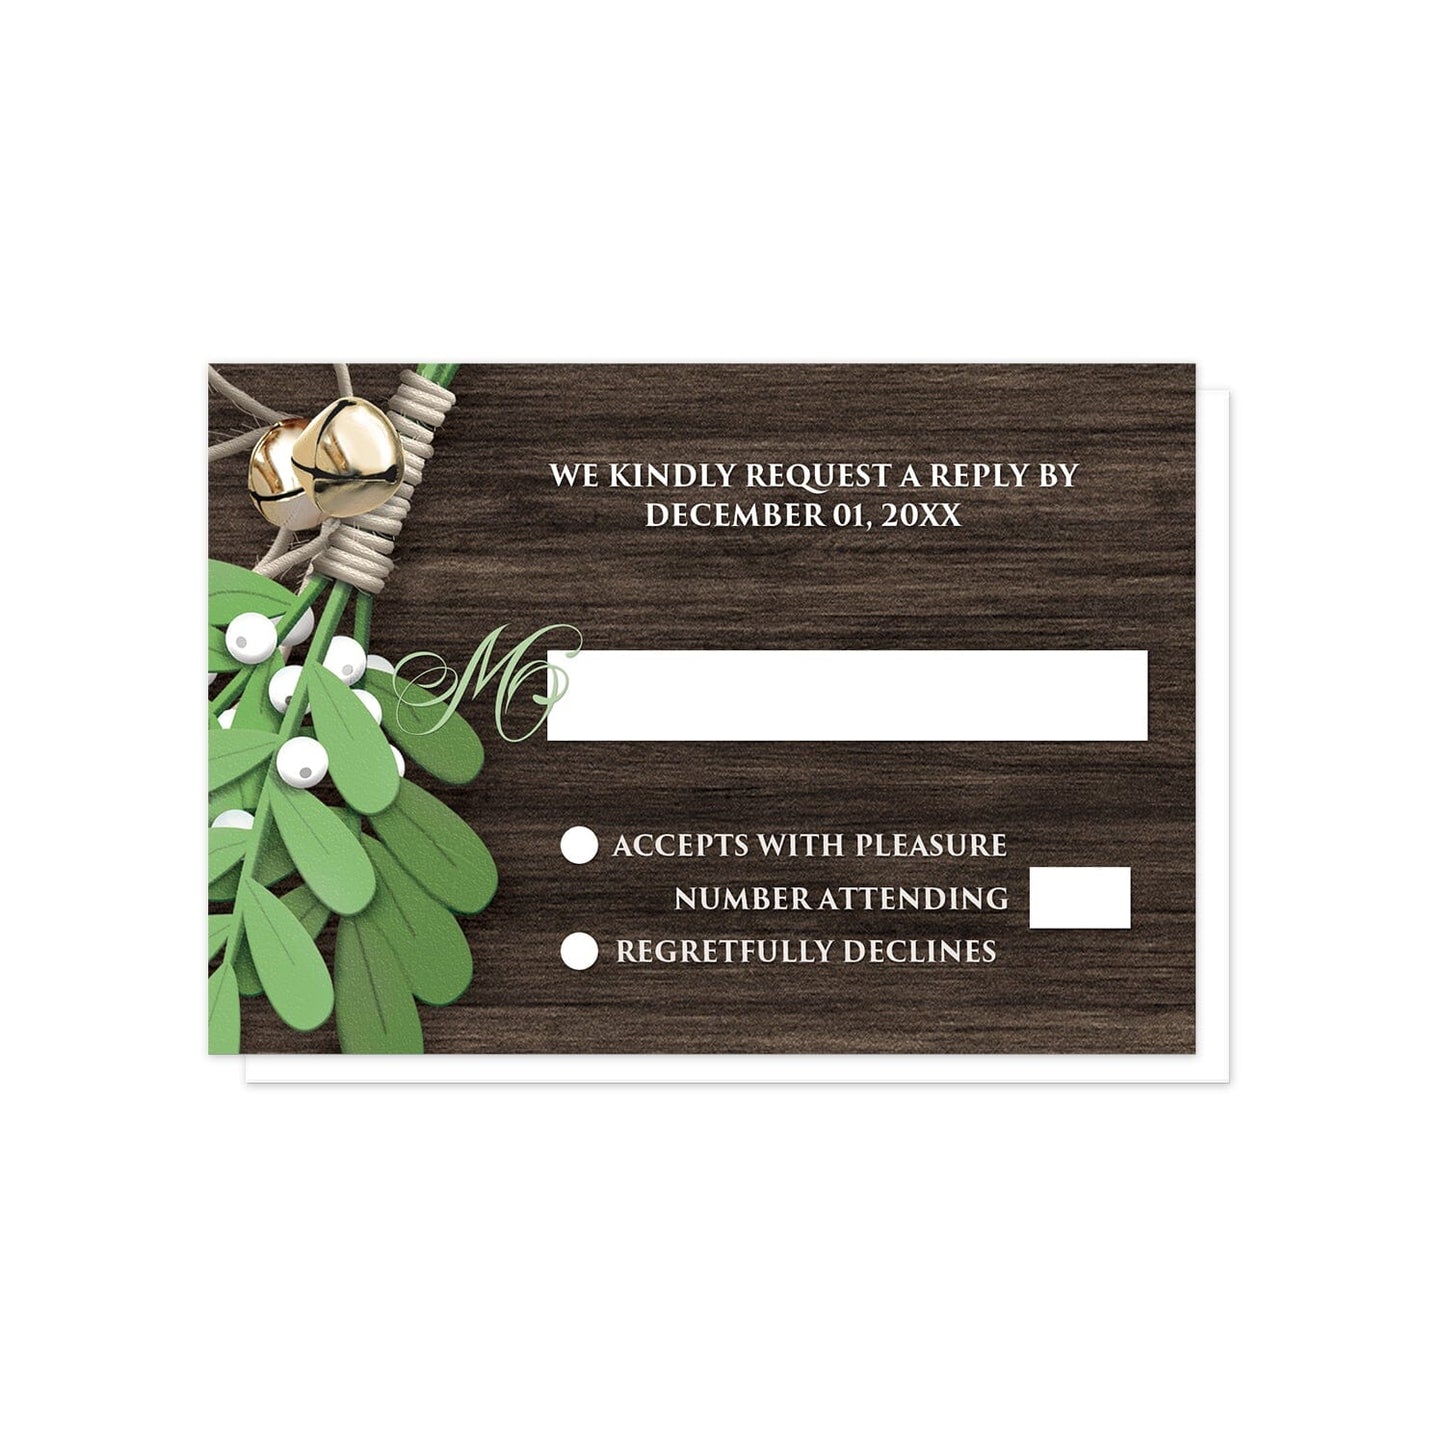 Rustic Mistletoe and Wood RSVP Cards at Artistically Invited.